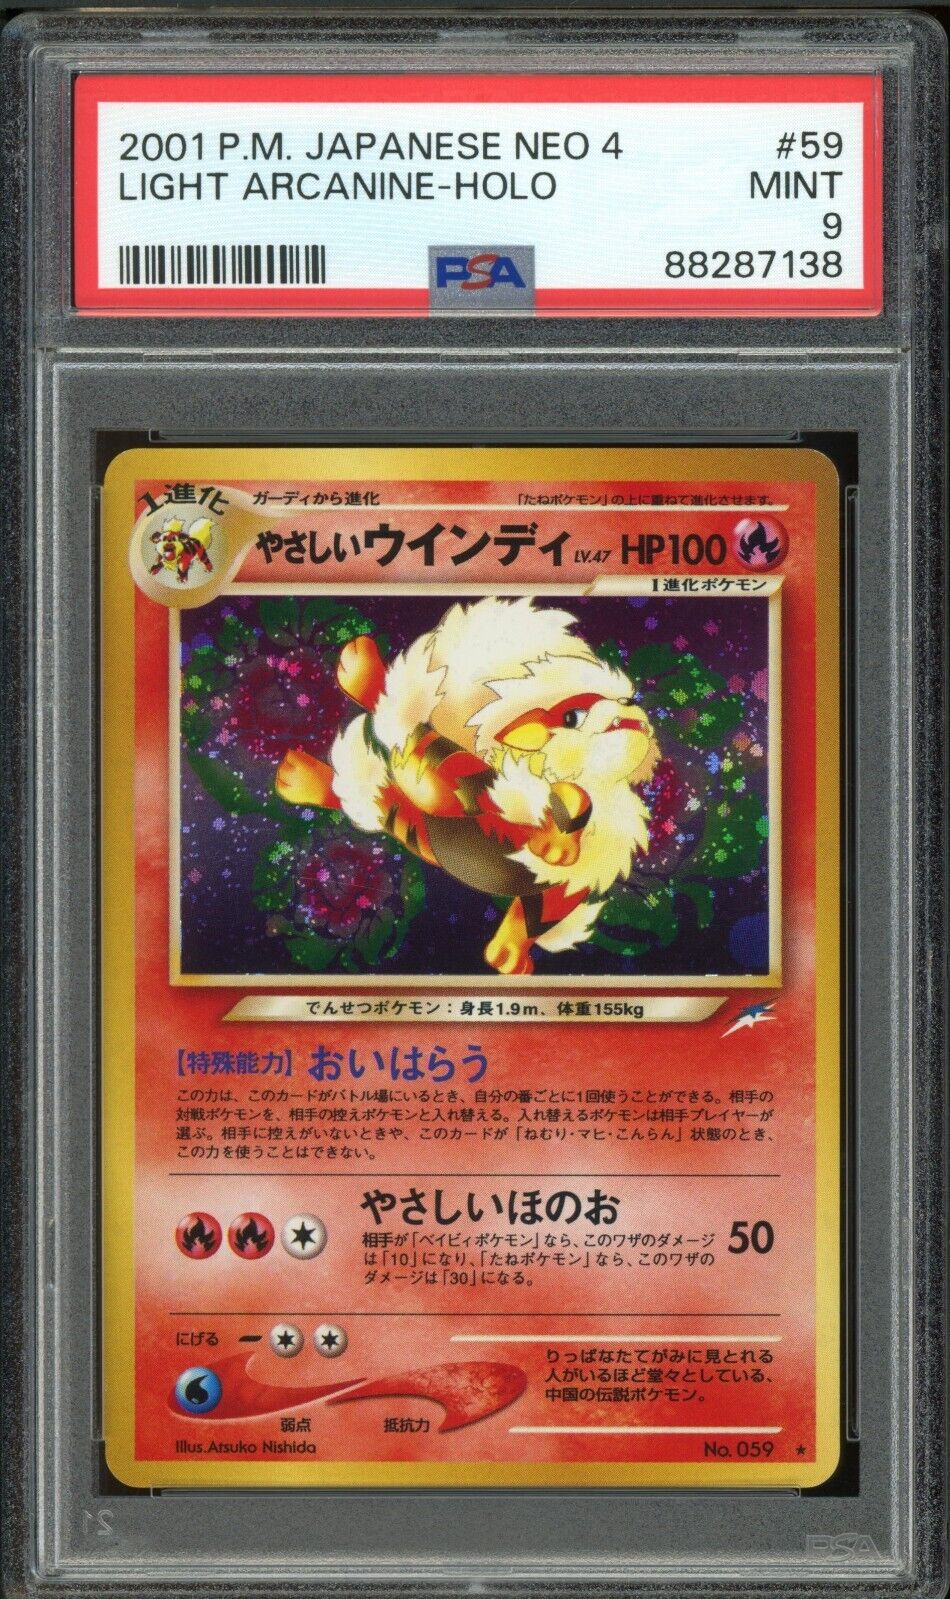 PSA 9 Light Arcanine #59 Japanese Neo 4 Darkness and to Light 2001 Holo